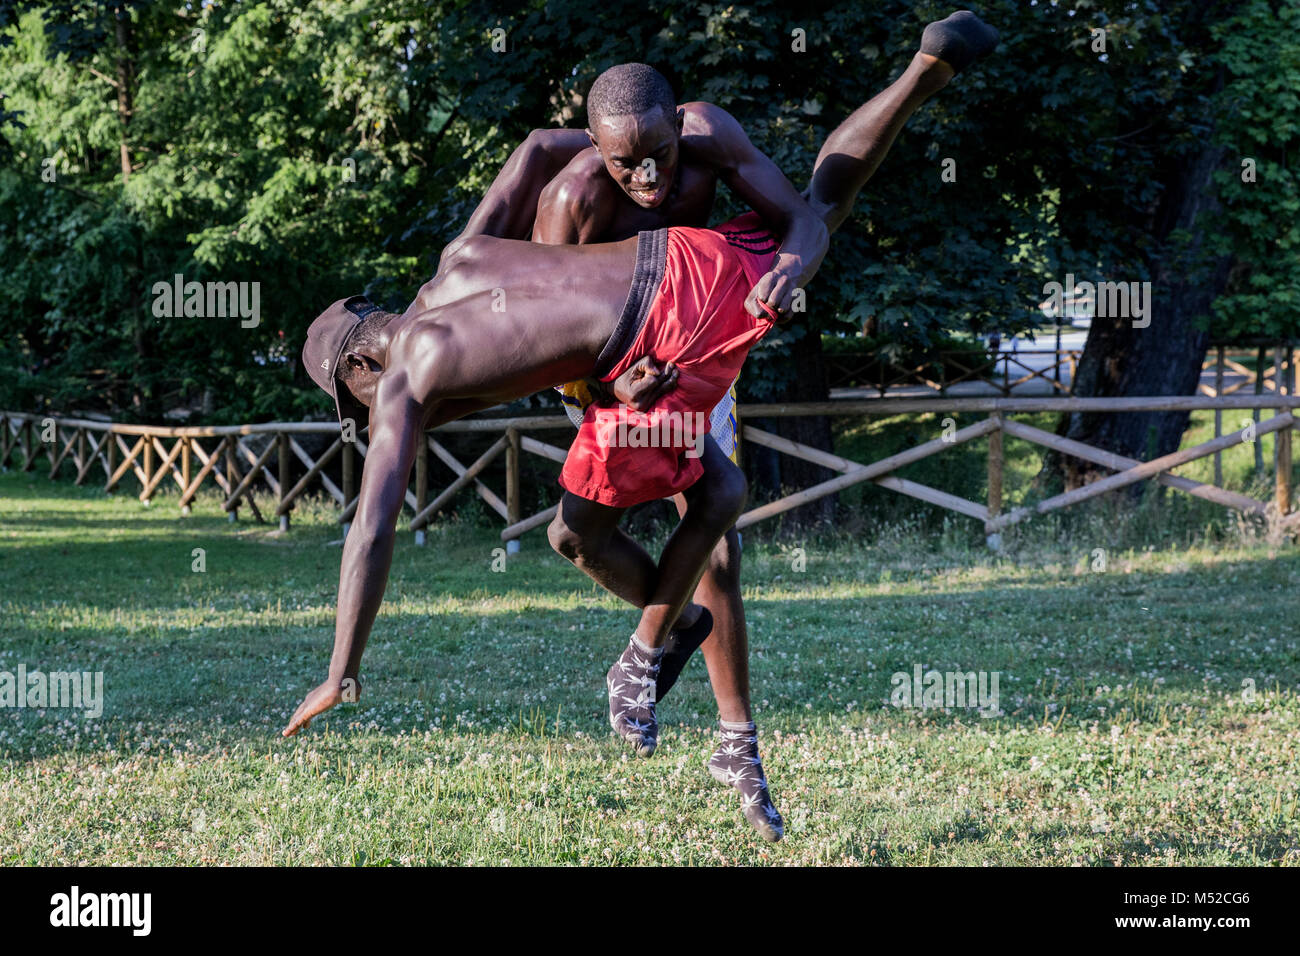 Young men seen at a Greco-Roman Wrestling training session in Milan's Sempione park Stock Photo